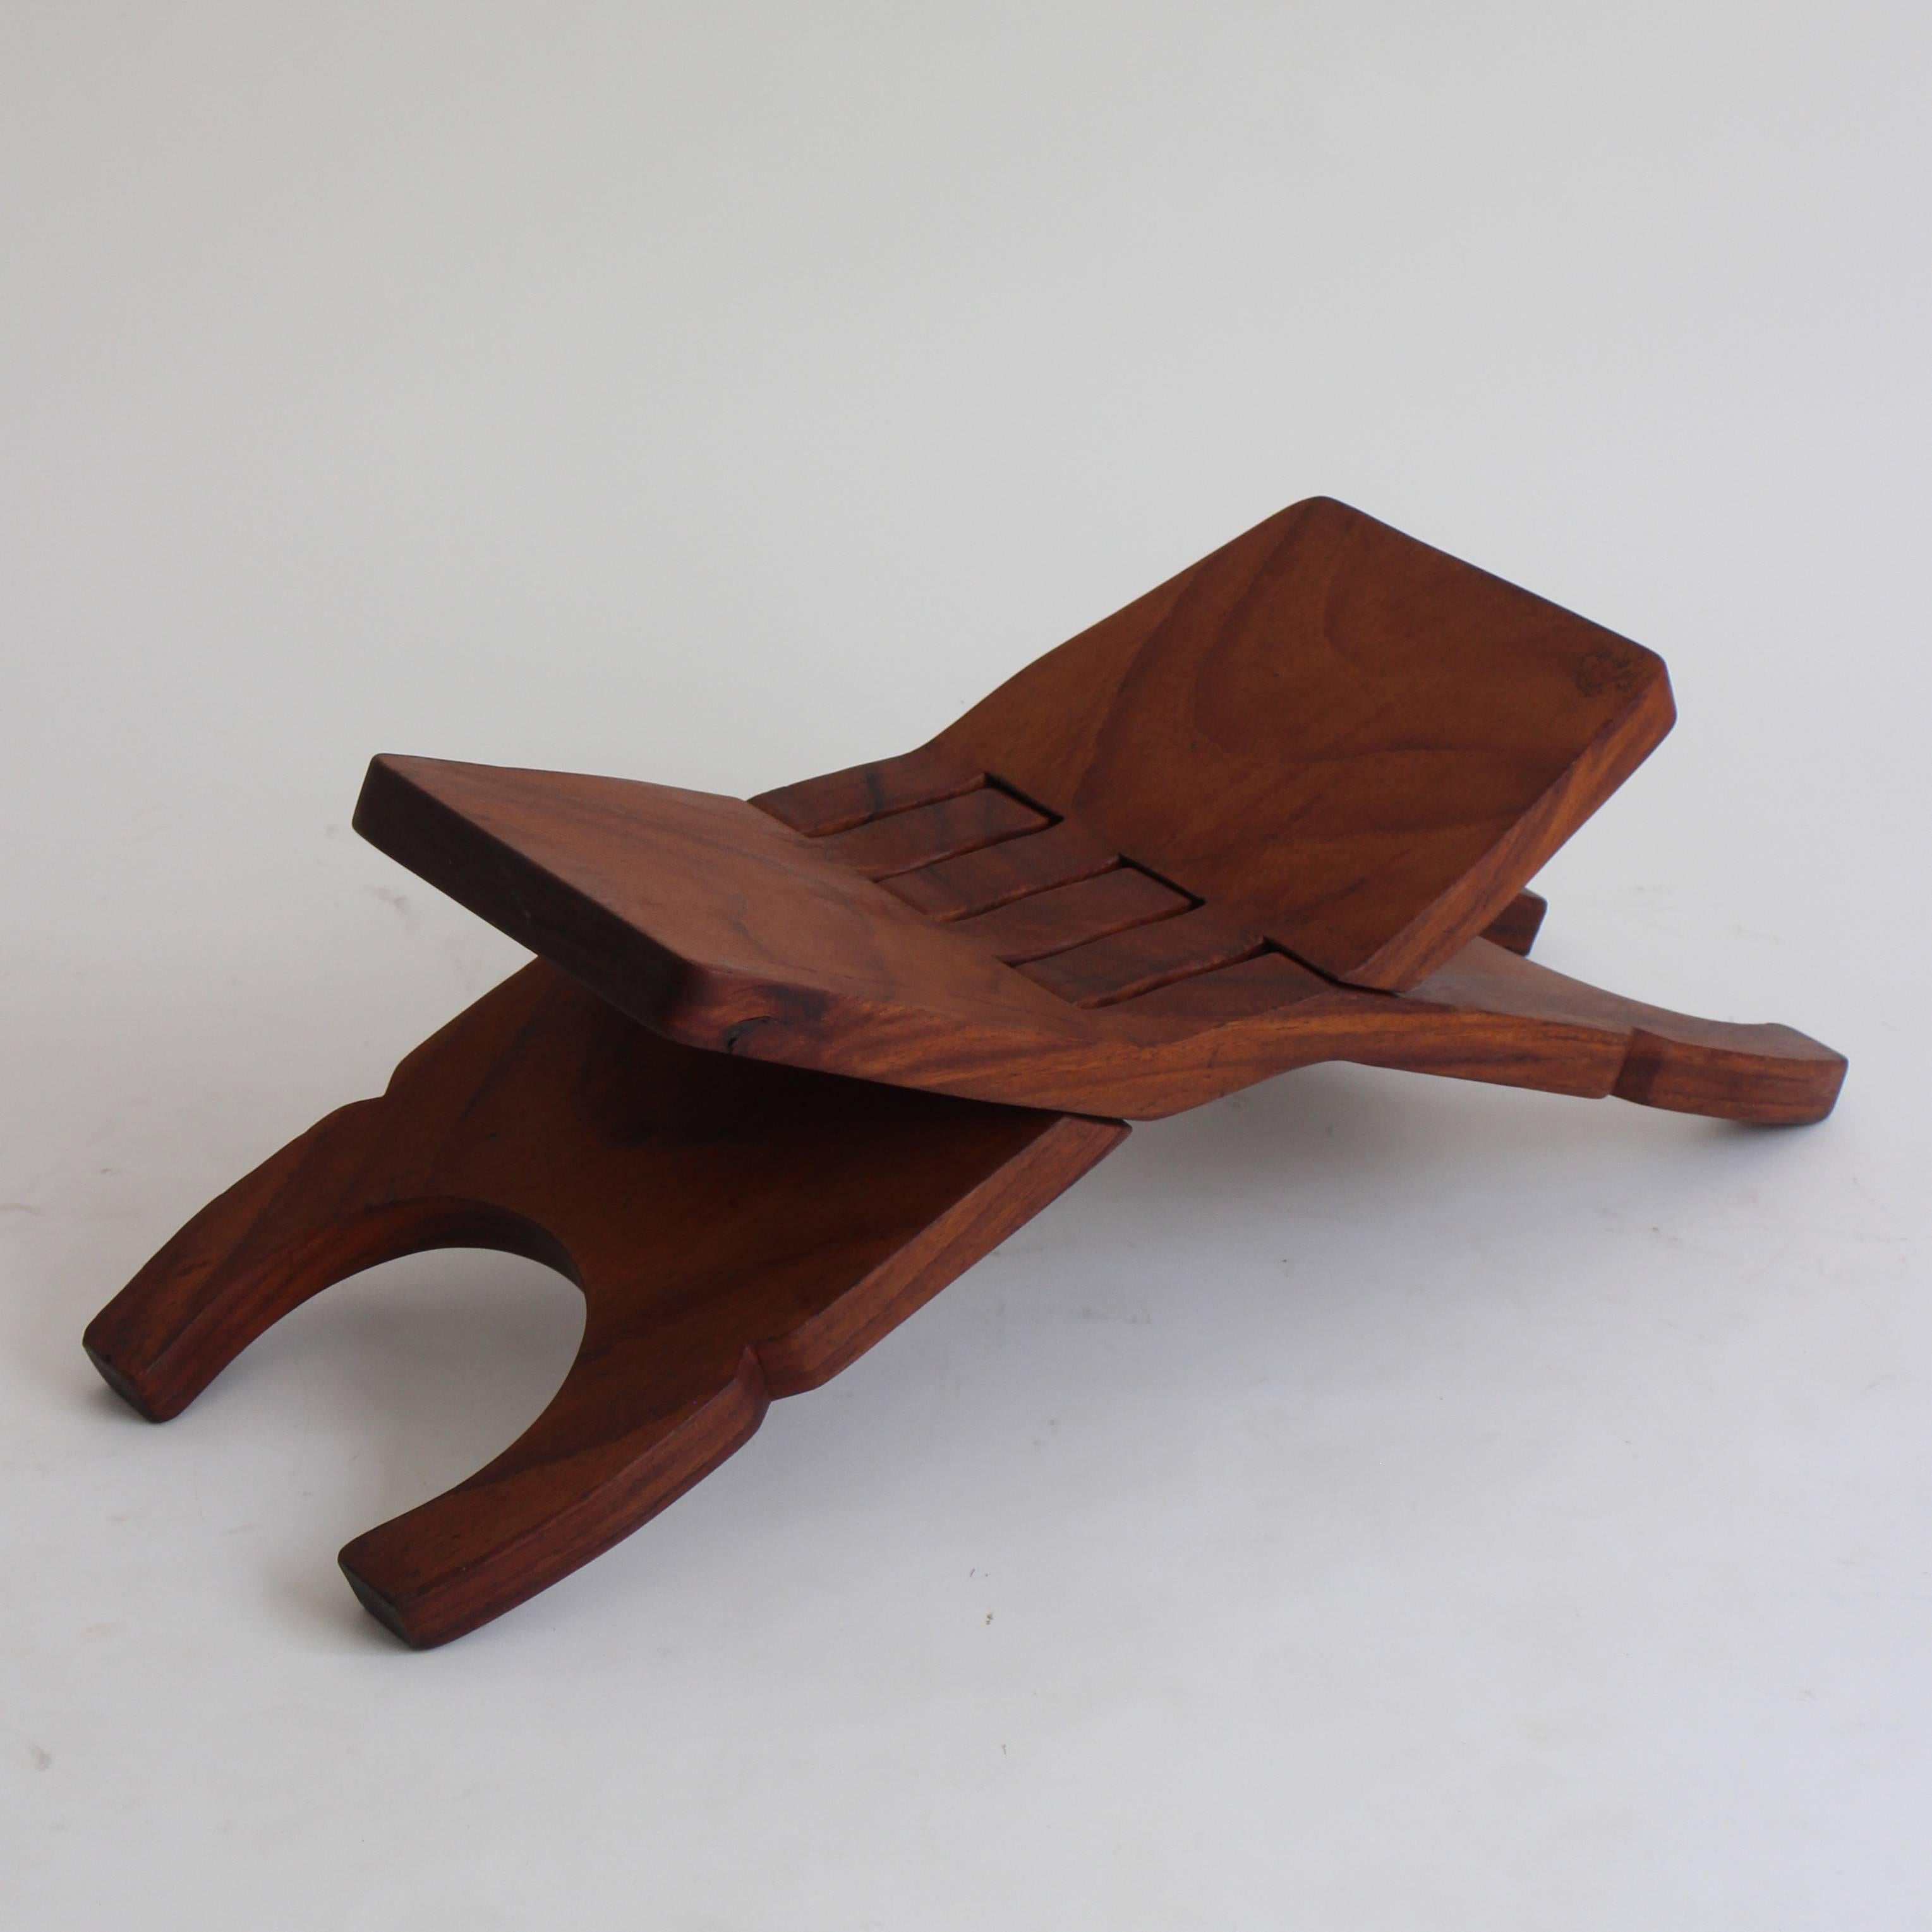 Wonderful portable and folding stool designed by Don Shoemaker. Signed with a 